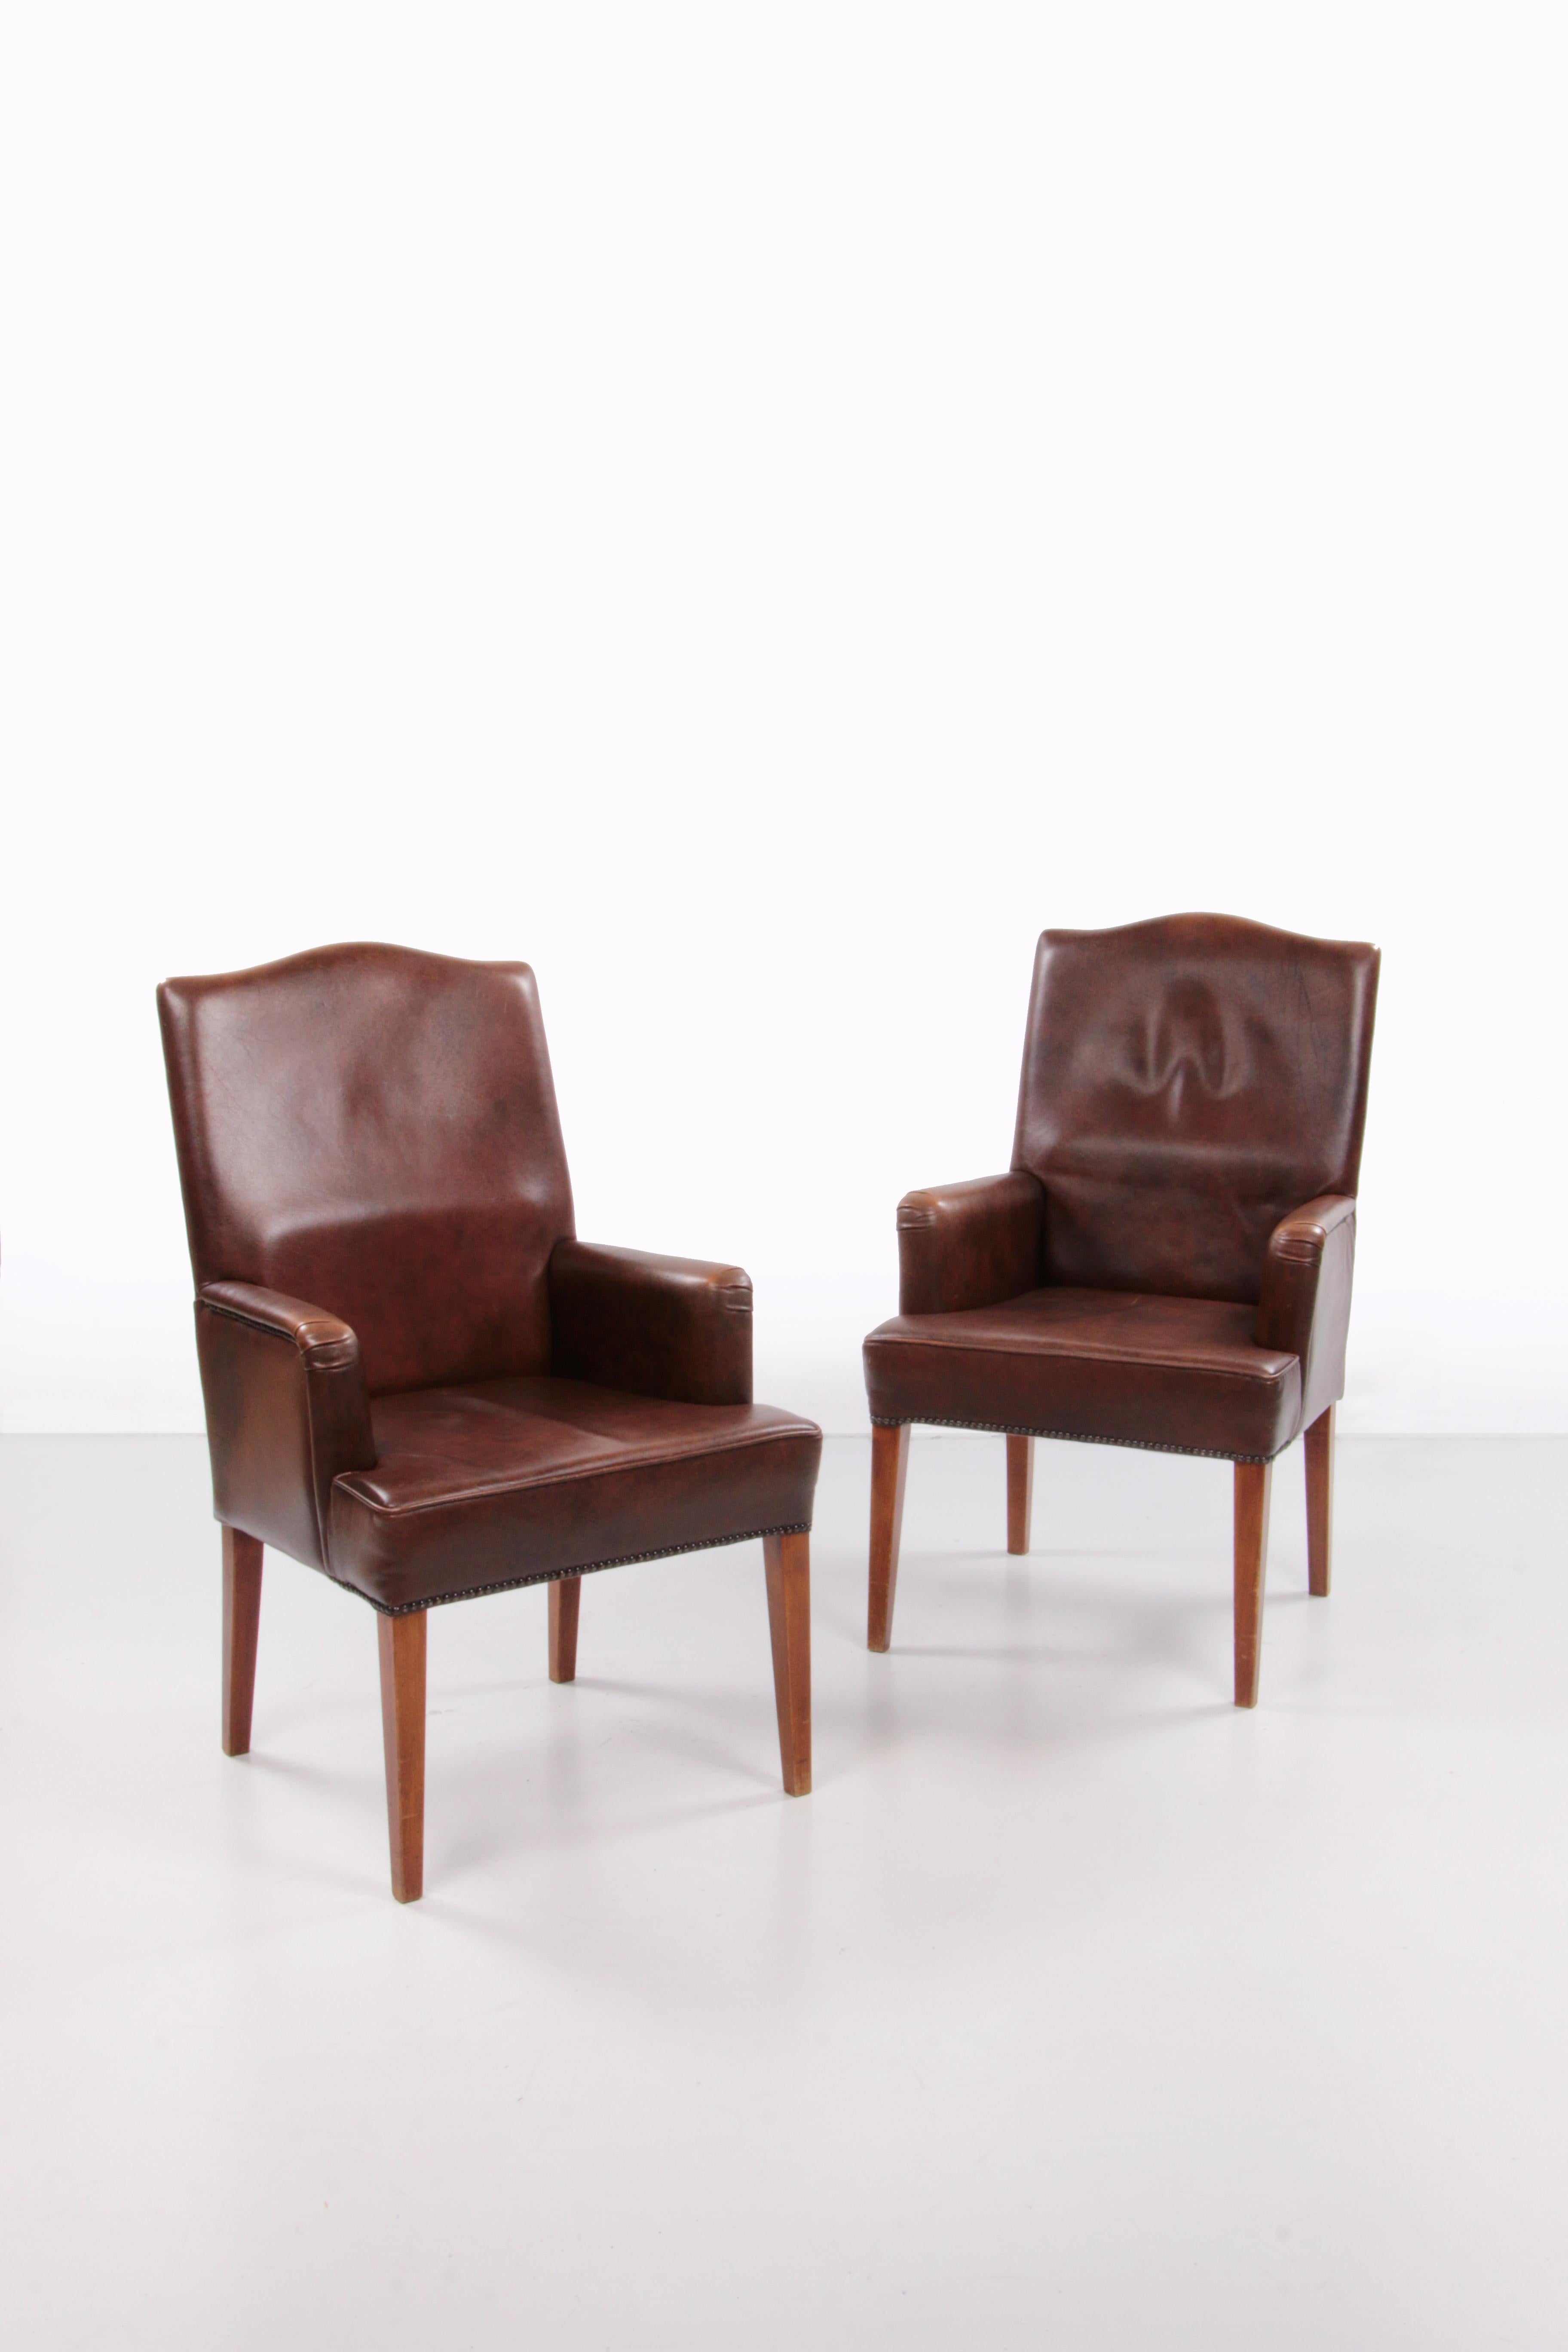 Set of 2 dining room chairs in sheep leather, 1970 Netherlands.


This is a set of leather chairs made of sheep leather.

Made in the Netherlands somewhere in the 1970s. These chairs are in perfect condition. The seat height is 46 cm.

Beautiful set